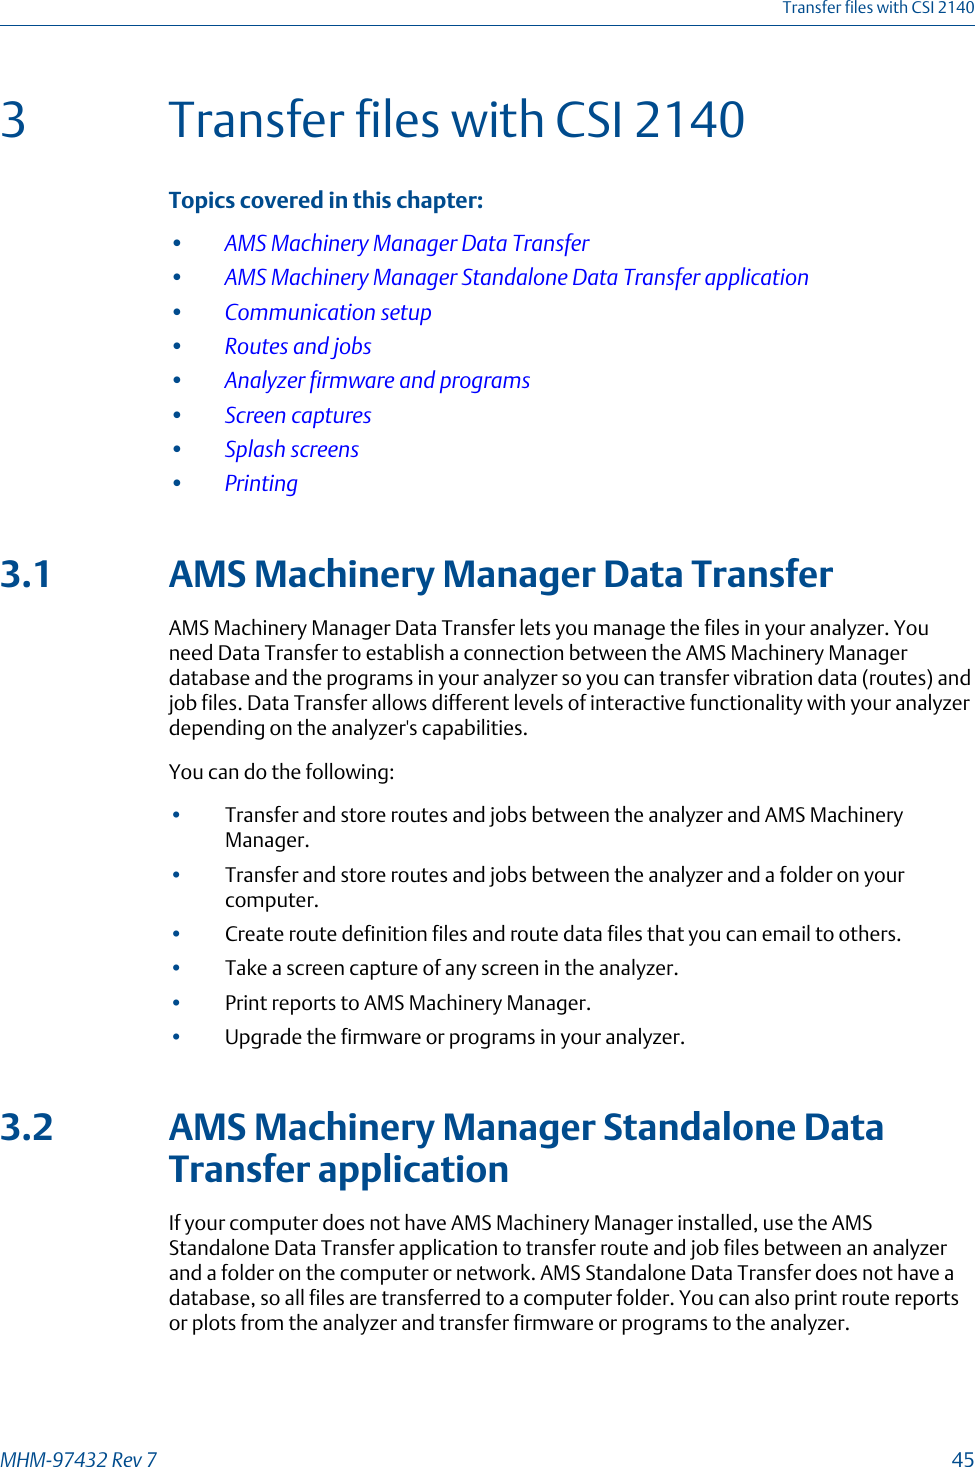 3 Transfer files with CSI 2140Topics covered in this chapter:•AMS Machinery Manager Data Transfer•AMS Machinery Manager Standalone Data Transfer application•Communication setup•Routes and jobs•Analyzer firmware and programs•Screen captures•Splash screens•Printing3.1 AMS Machinery Manager Data TransferAMS Machinery Manager Data Transfer lets you manage the files in your analyzer. Youneed Data Transfer to establish a connection between the AMS Machinery Managerdatabase and the programs in your analyzer so you can transfer vibration data (routes) andjob files. Data Transfer allows different levels of interactive functionality with your analyzerdepending on the analyzer&apos;s capabilities.You can do the following:•Transfer and store routes and jobs between the analyzer and AMS MachineryManager.•Transfer and store routes and jobs between the analyzer and a folder on yourcomputer.•Create route definition files and route data files that you can email to others.•Take a screen capture of any screen in the analyzer.•Print reports to AMS Machinery Manager.•Upgrade the firmware or programs in your analyzer.3.2 AMS Machinery Manager Standalone DataTransfer applicationIf your computer does not have AMS Machinery Manager installed, use the AMSStandalone Data Transfer application to transfer route and job files between an analyzerand a folder on the computer or network. AMS Standalone Data Transfer does not have adatabase, so all files are transferred to a computer folder. You can also print route reportsor plots from the analyzer and transfer firmware or programs to the analyzer.Transfer files with CSI 2140MHM-97432 Rev 7  45